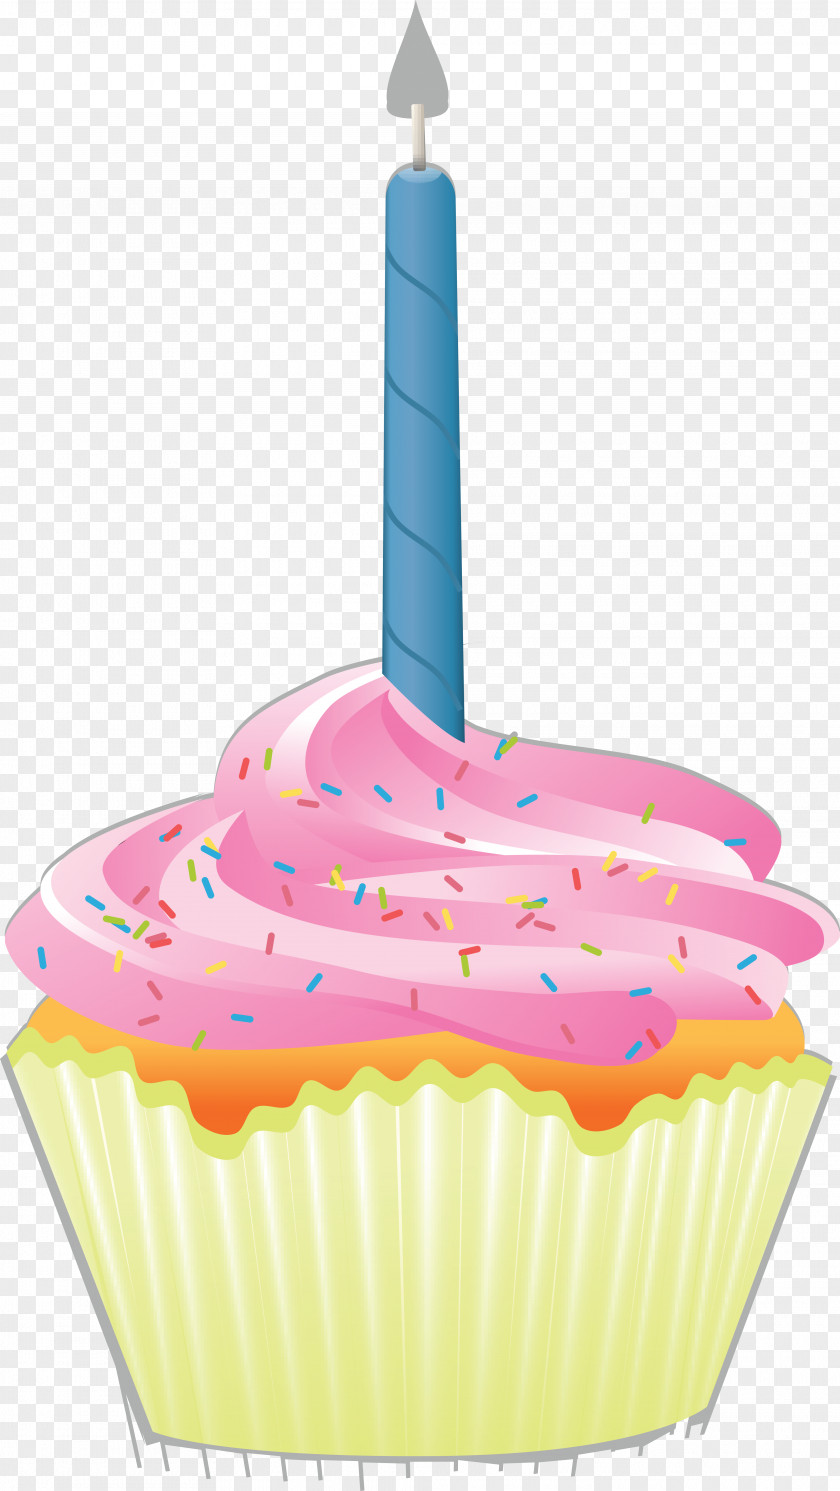 Candles Cupcake Birthday Cake Muffin Clip Art PNG